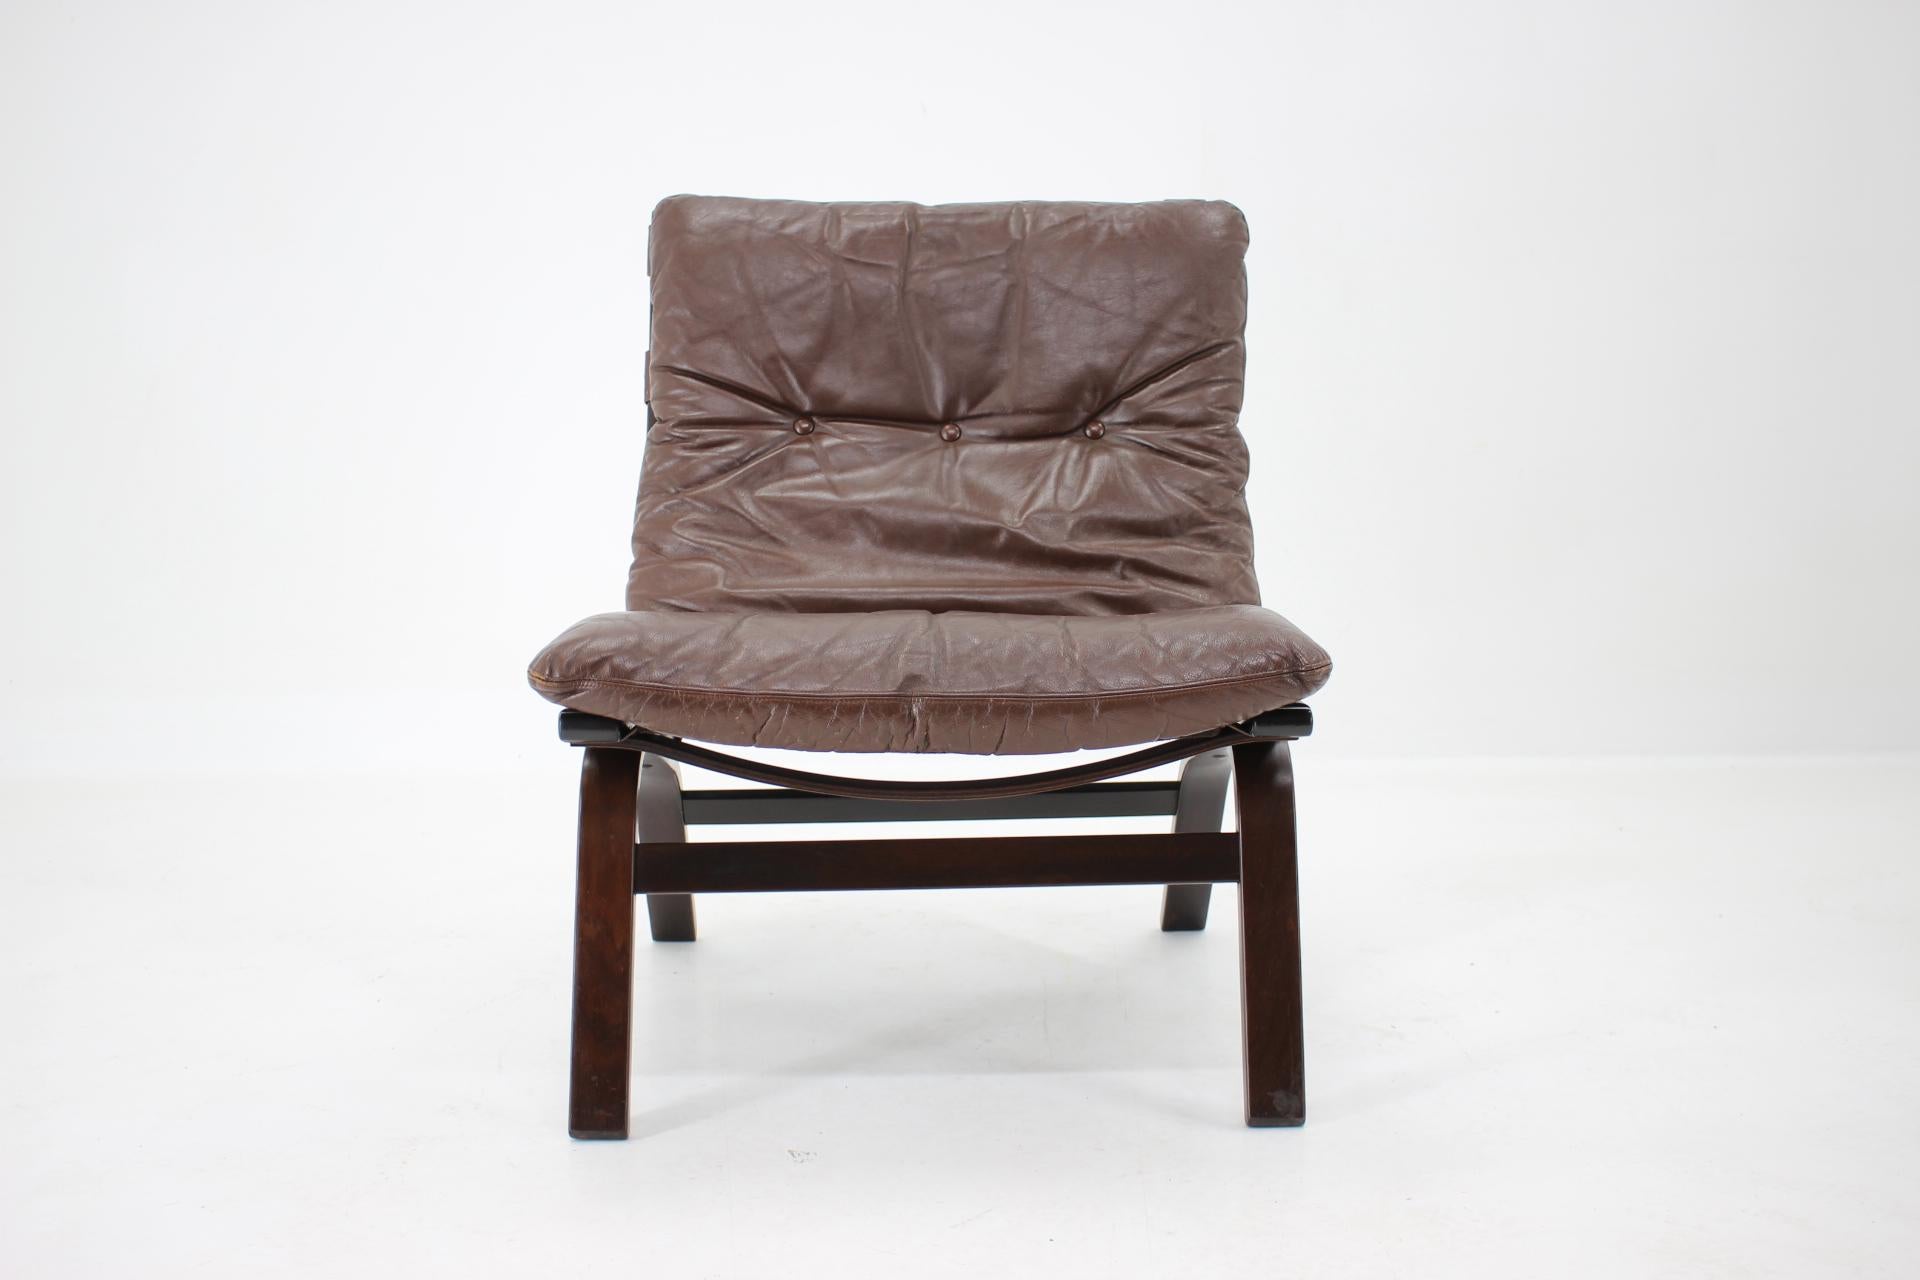 - Good original leather pillow
- Repolished wooden parts.